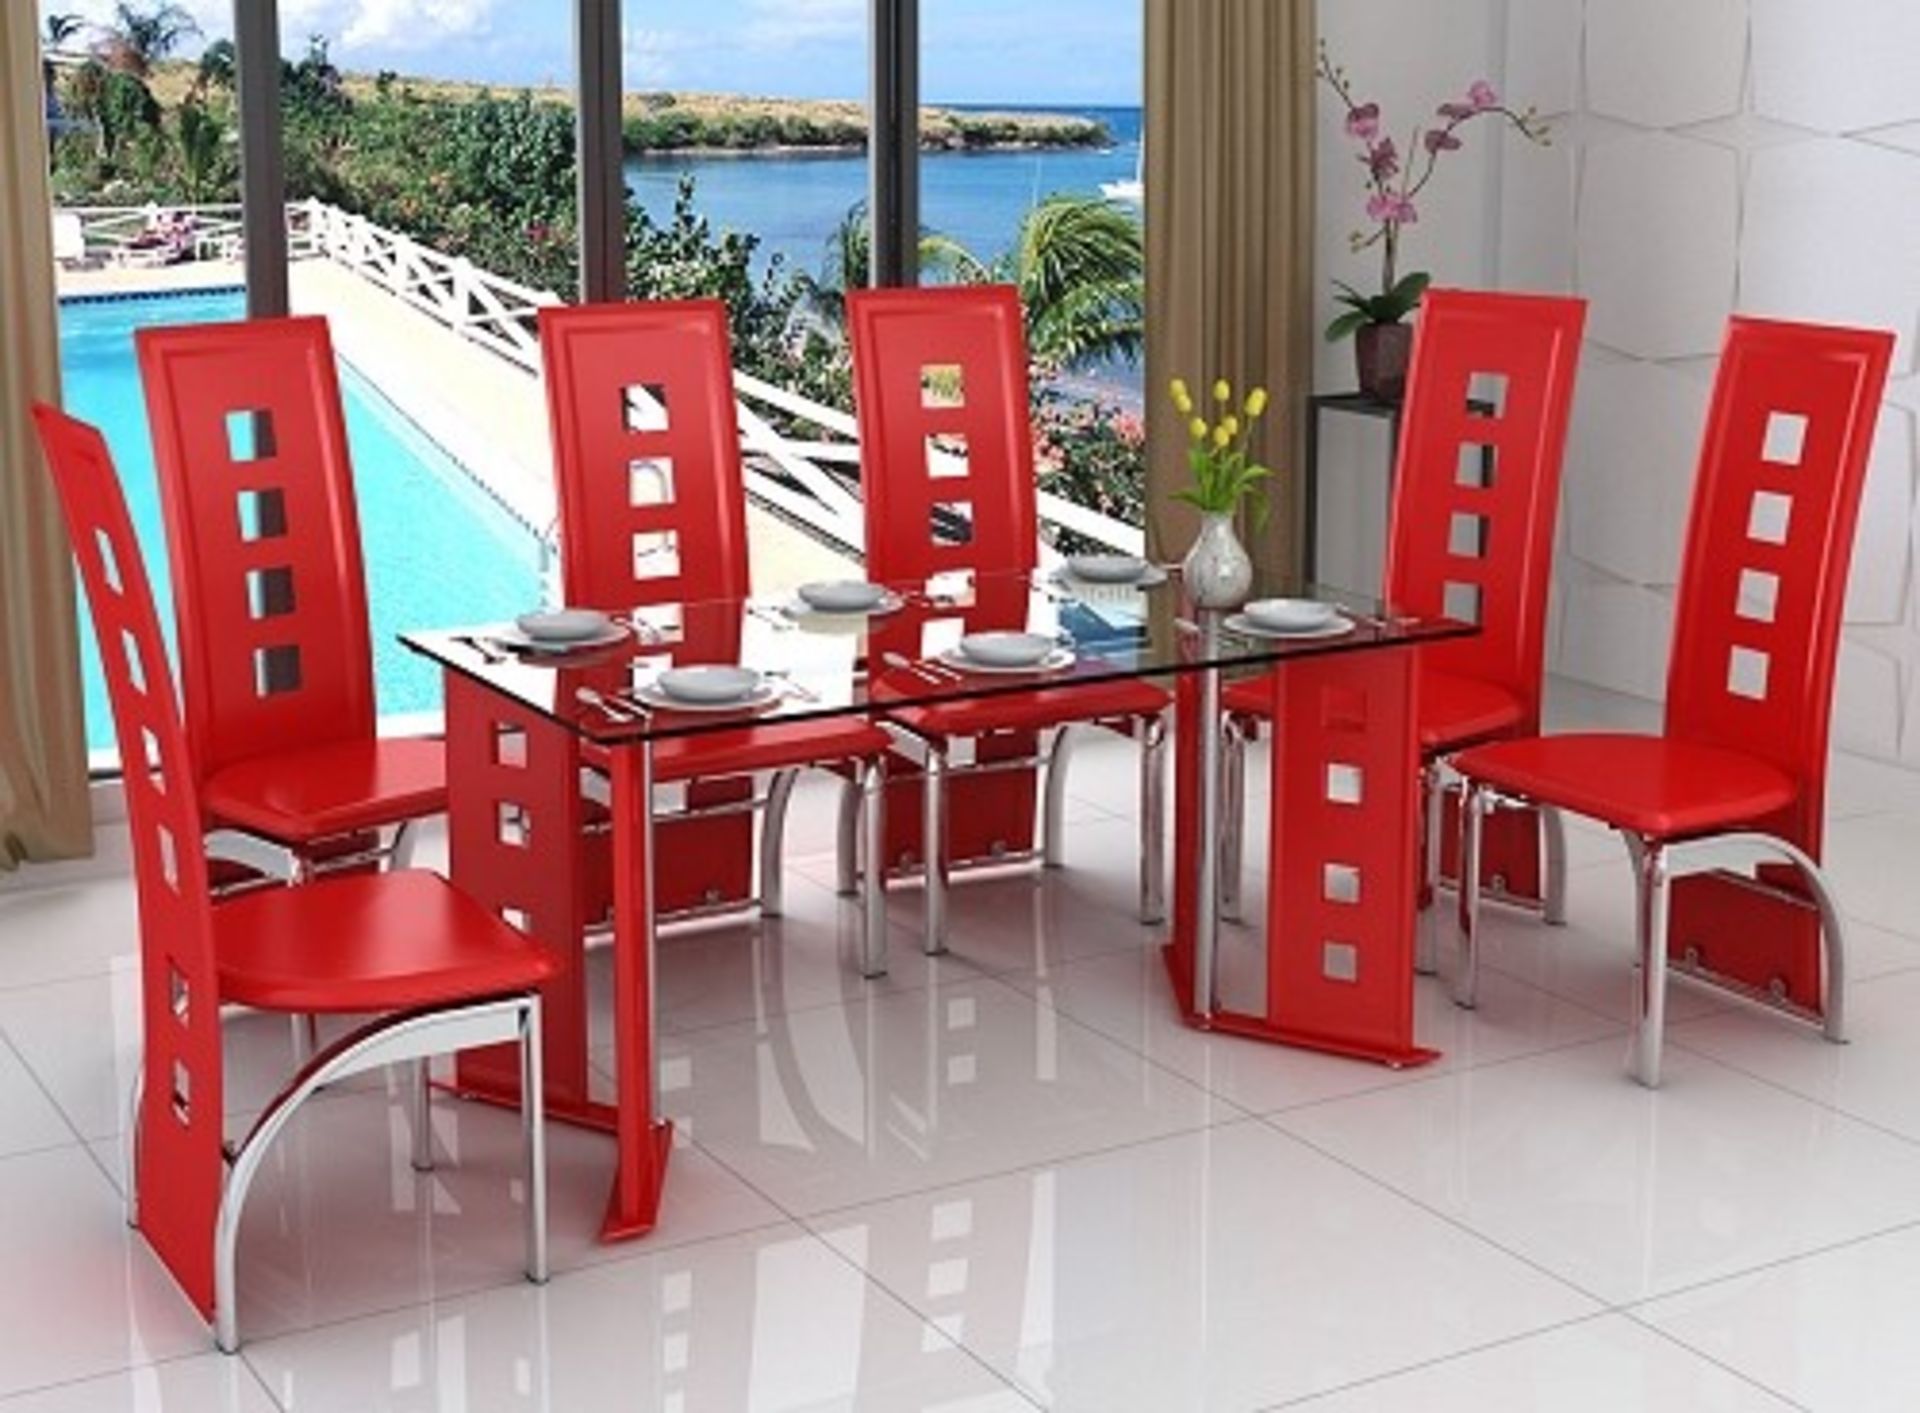 1 BRAND NEW BOXED 6 SEATER DINING TABLE WITH RED PU LEGS / DTBL002RED (PLEASE NOTE THIS LISTING IS